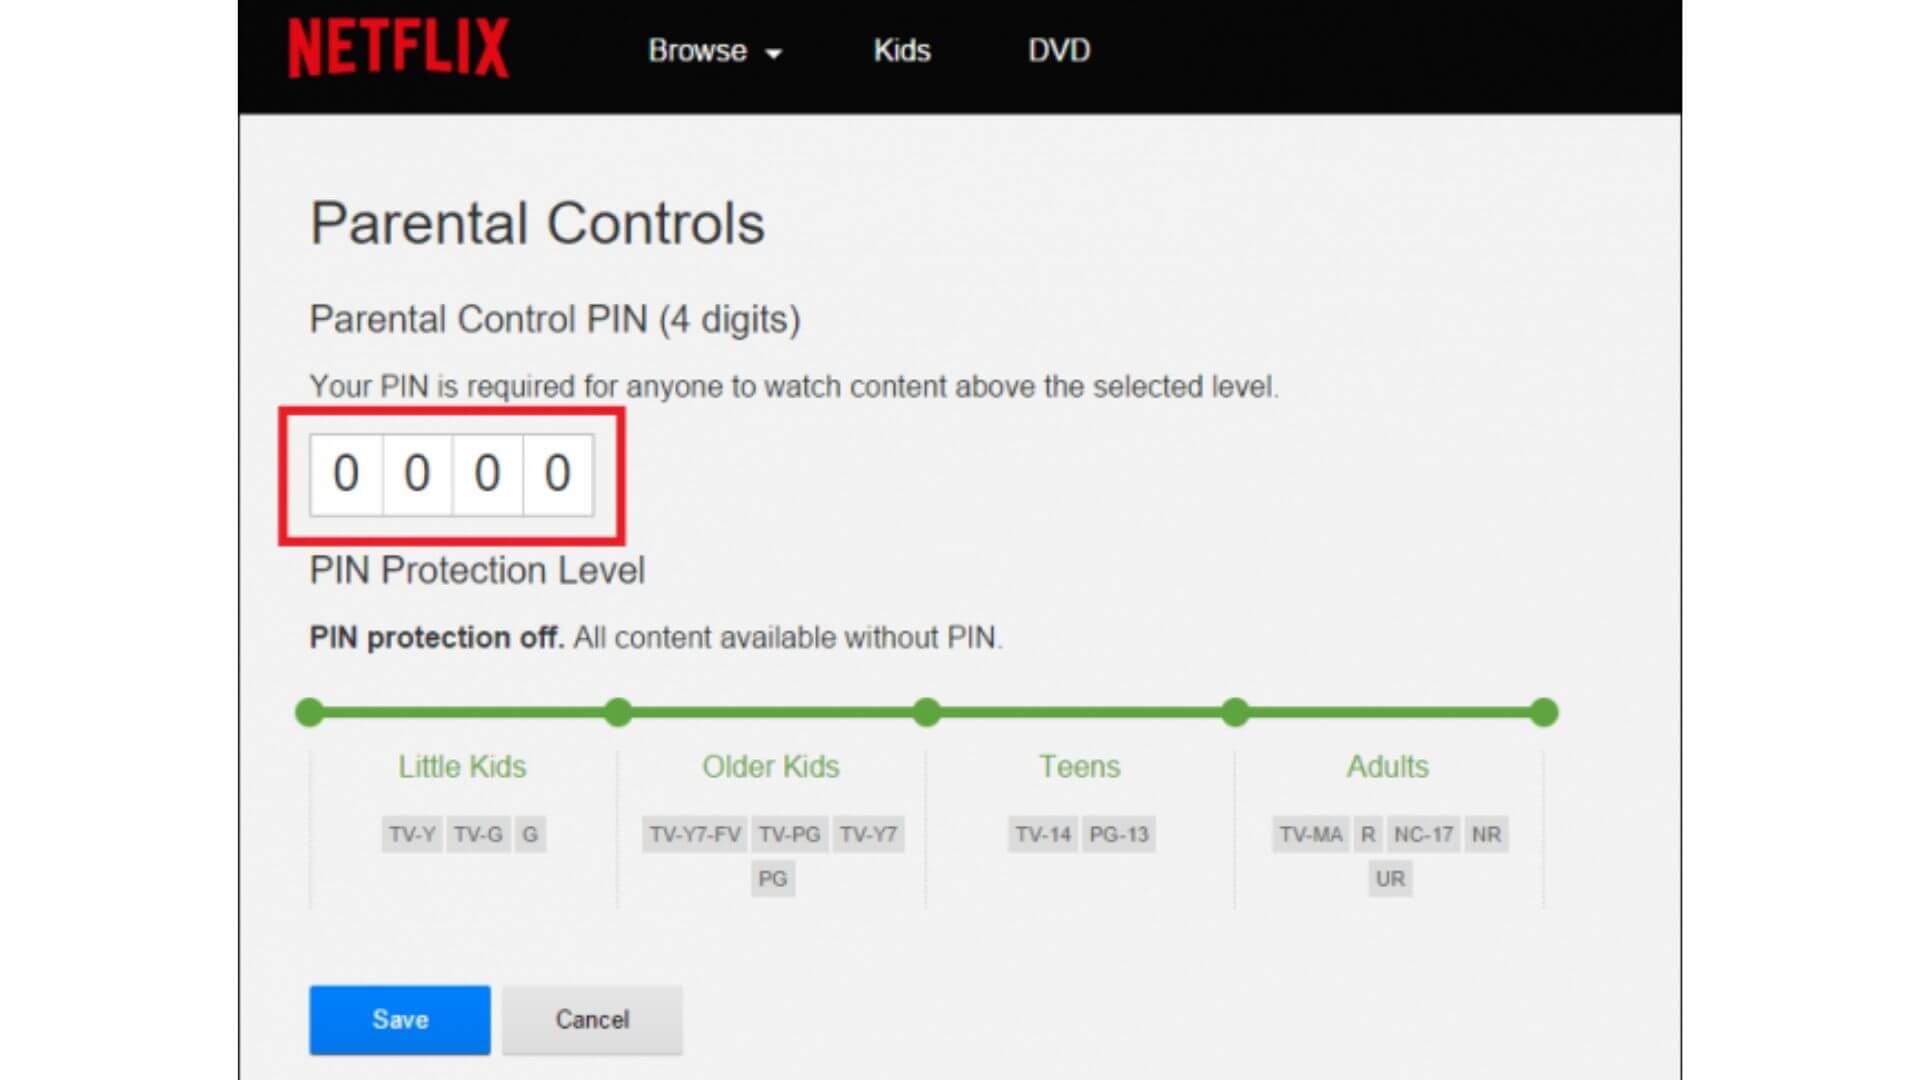 Set PIN in your Netflix account